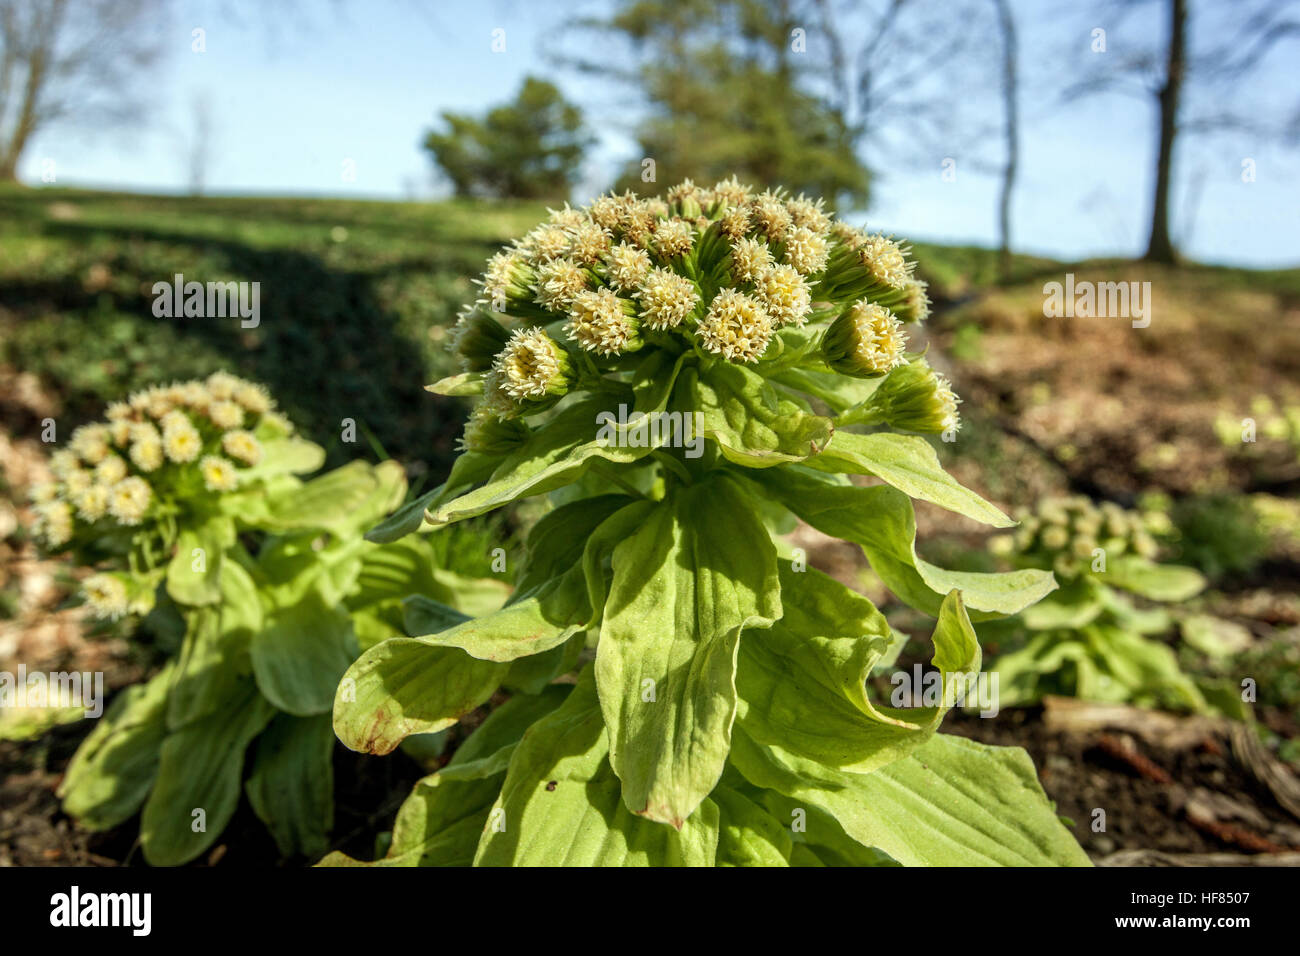 Flower sprouting from a ground, Petasites japonicus, Japanese Giant butterbur or fuki, early spring Stock Photo